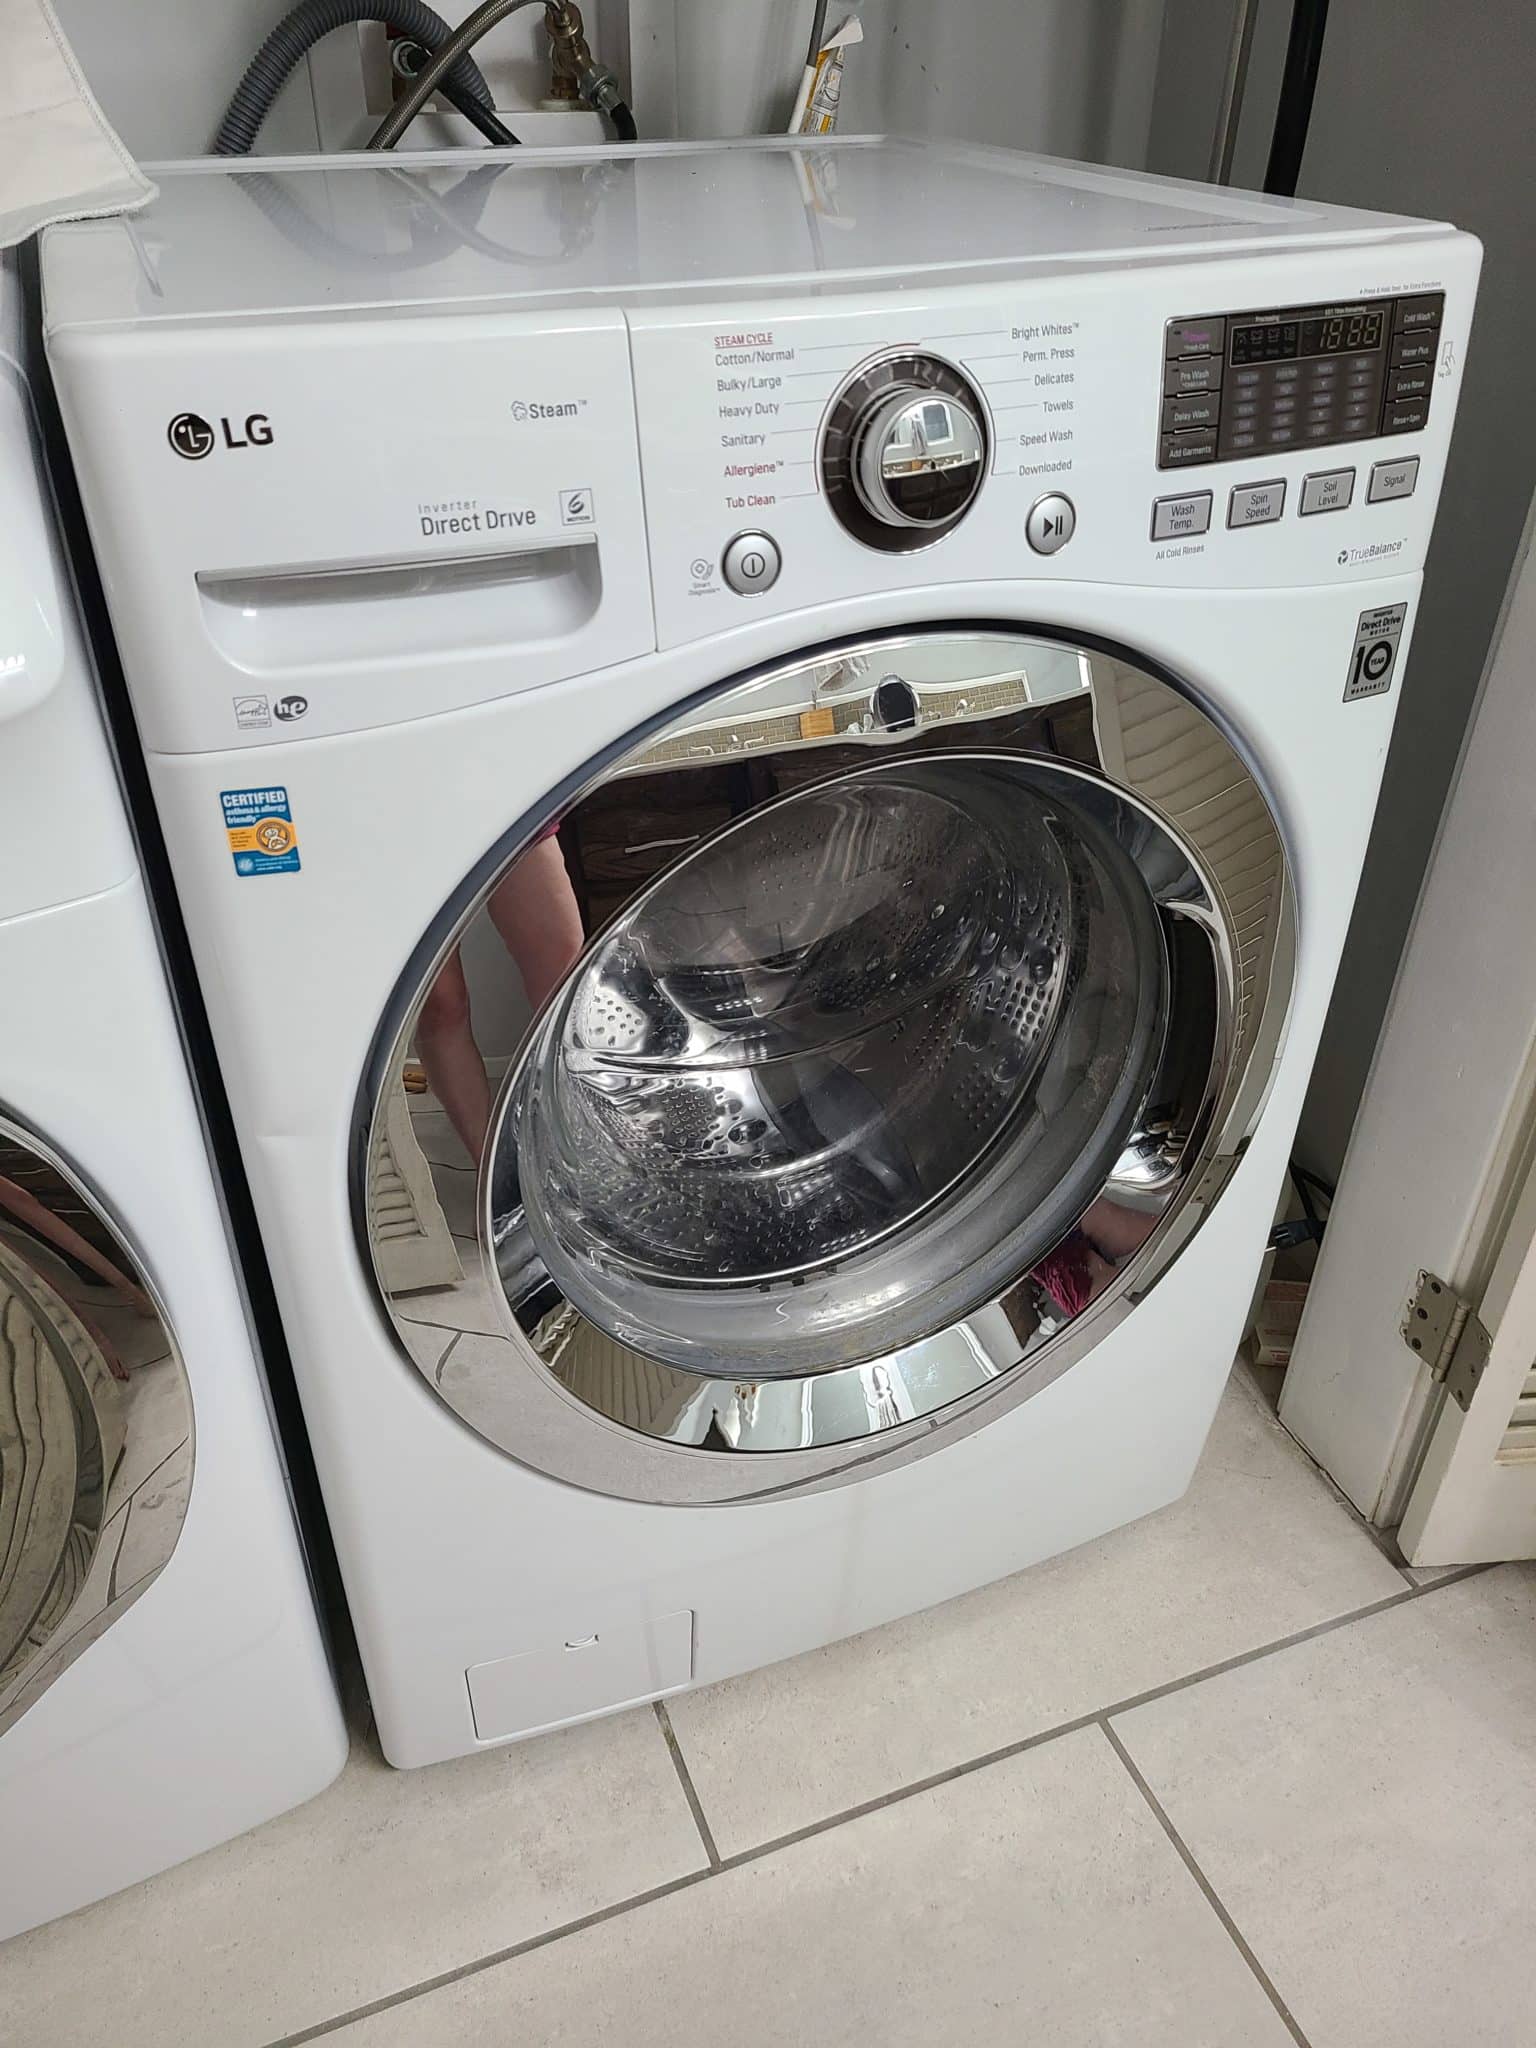 Best Laundry Detergent Sheets for an Eco-Friendly Wash